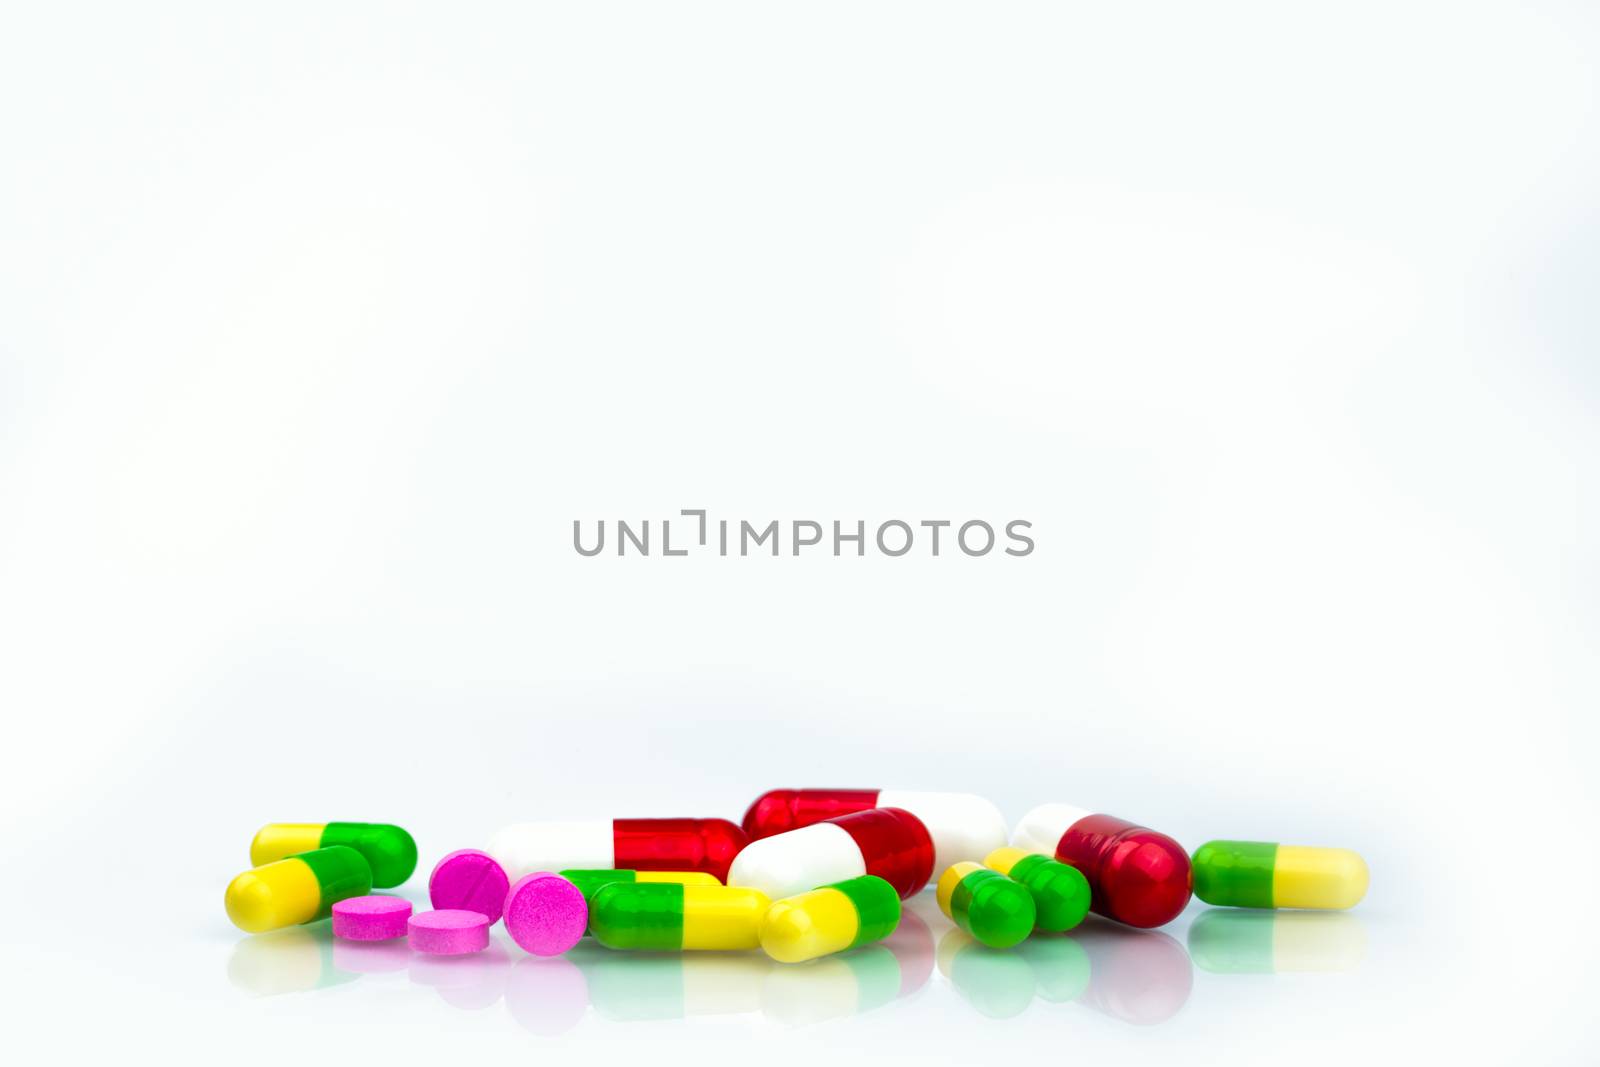 Pile of colorful capsule and tablets pills on white background with copy space for text. Pharmacy department in the hospital concept. Drug store concept. Pharmaceutical industry. Pharmacy background. Global healthcare concept. by Fahroni